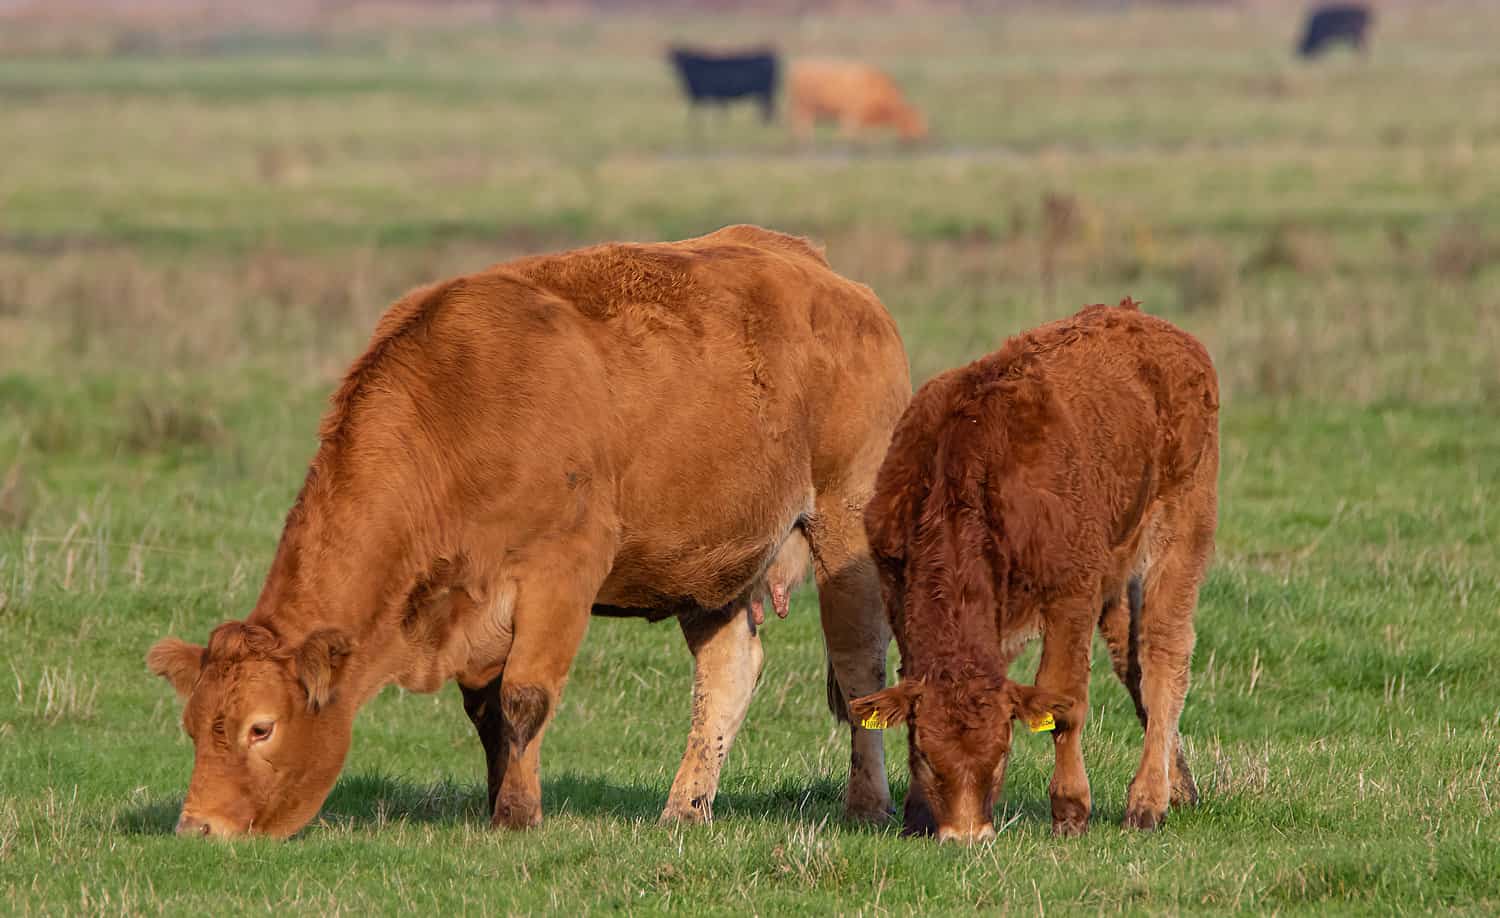 Limousin cattle Grazing